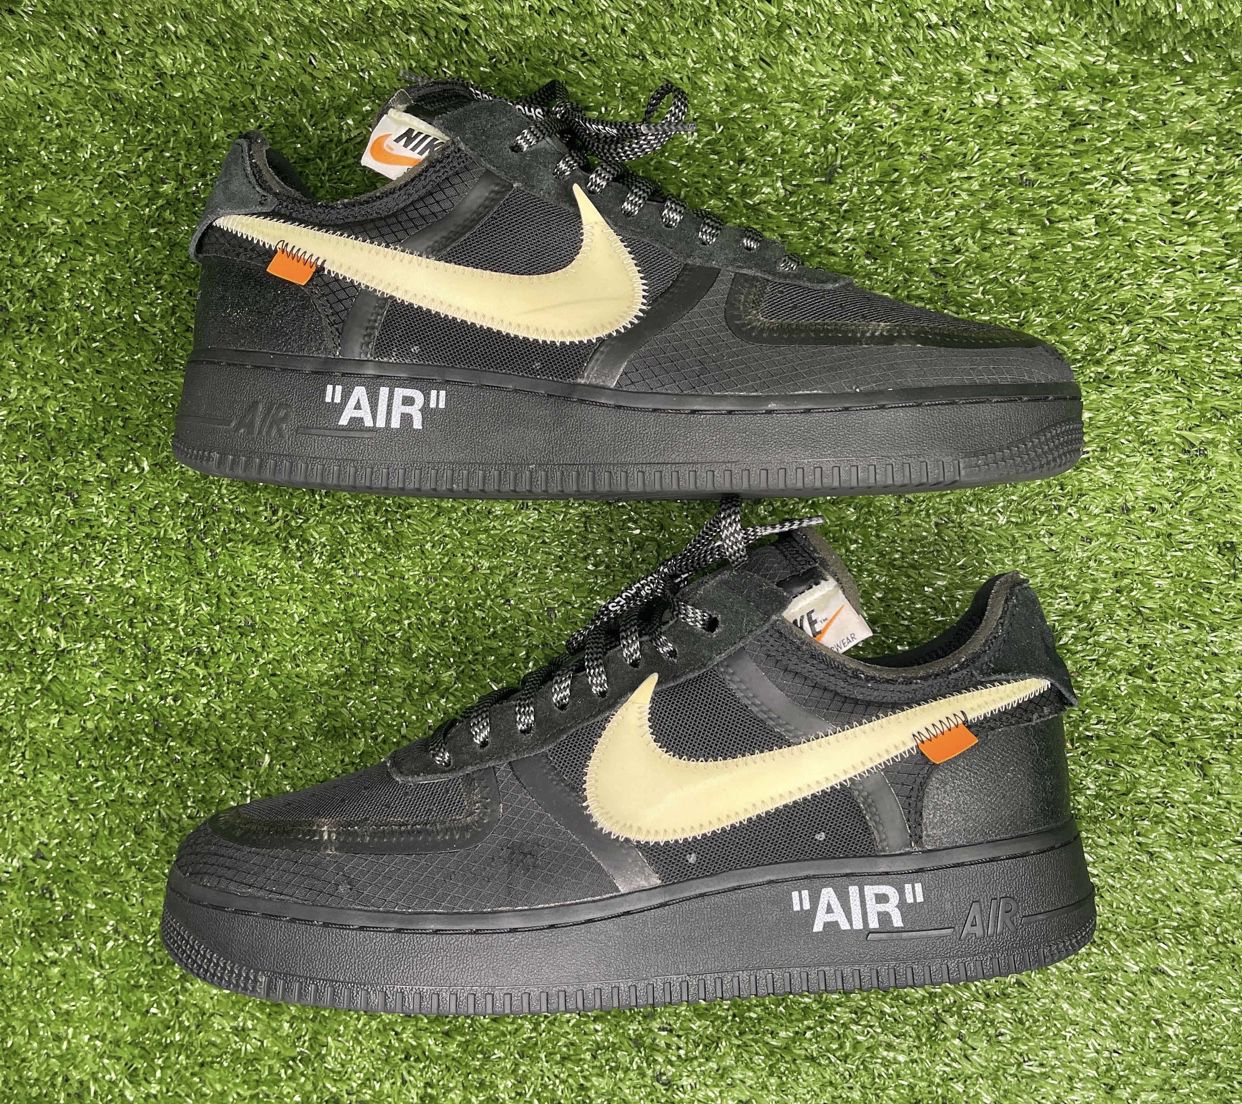 Air Force 1 Low x Off White “Black” 2018